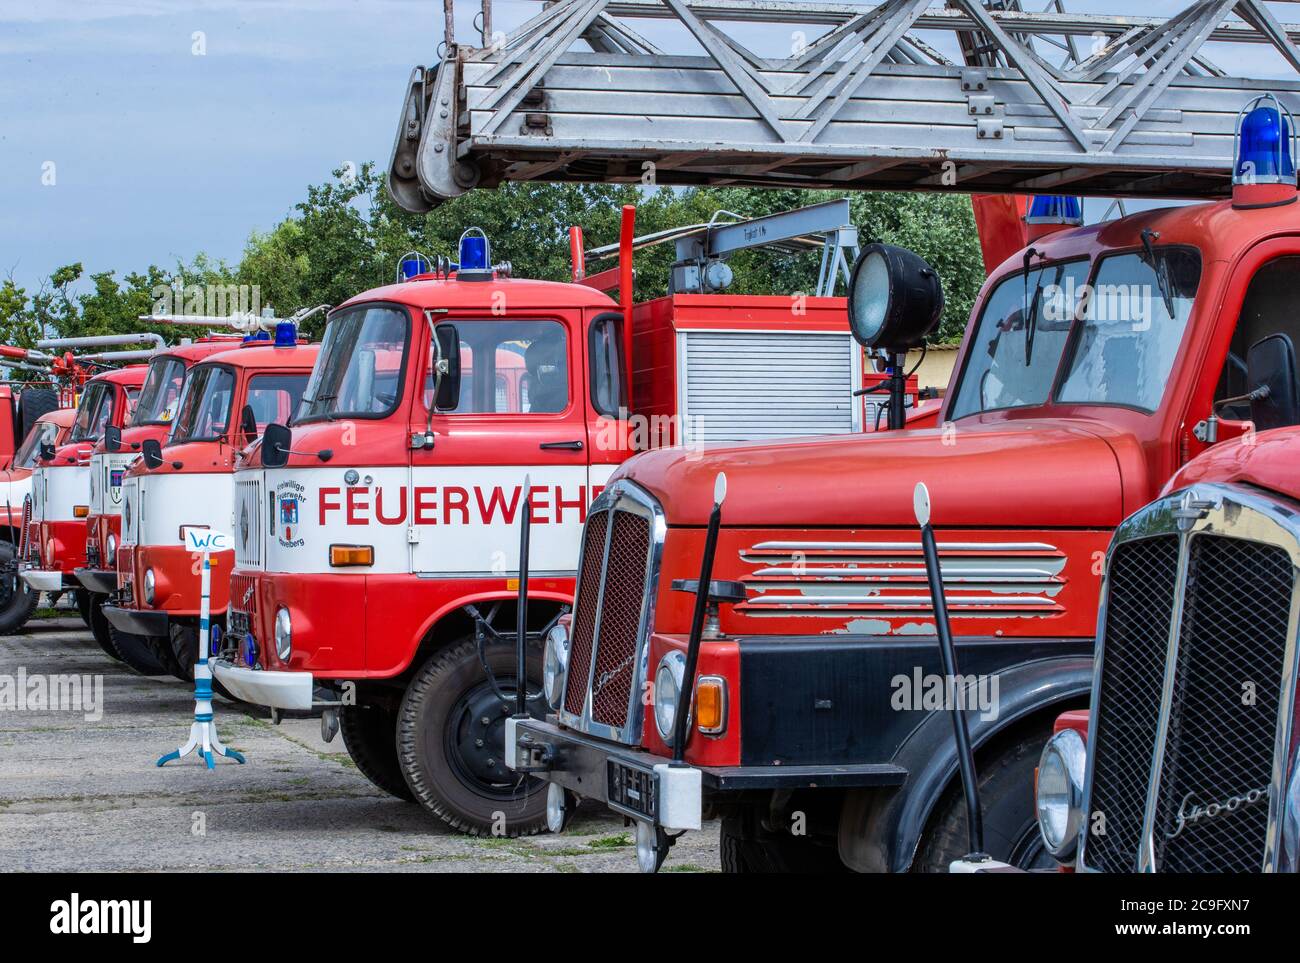 Beuster, Germany. 24th July, 2020. Fire engines are on display on the exhibition grounds during the blue light days in the blue light museum Beuster. Despite corona protection measures, the blue light museum on the Elbe celebrates its museum week and shows the collection of historical fire brigade, police and military technology. Credit: Jens Büttner/dpa-Zentralbild/ZB/dpa/Alamy Live News Stock Photo